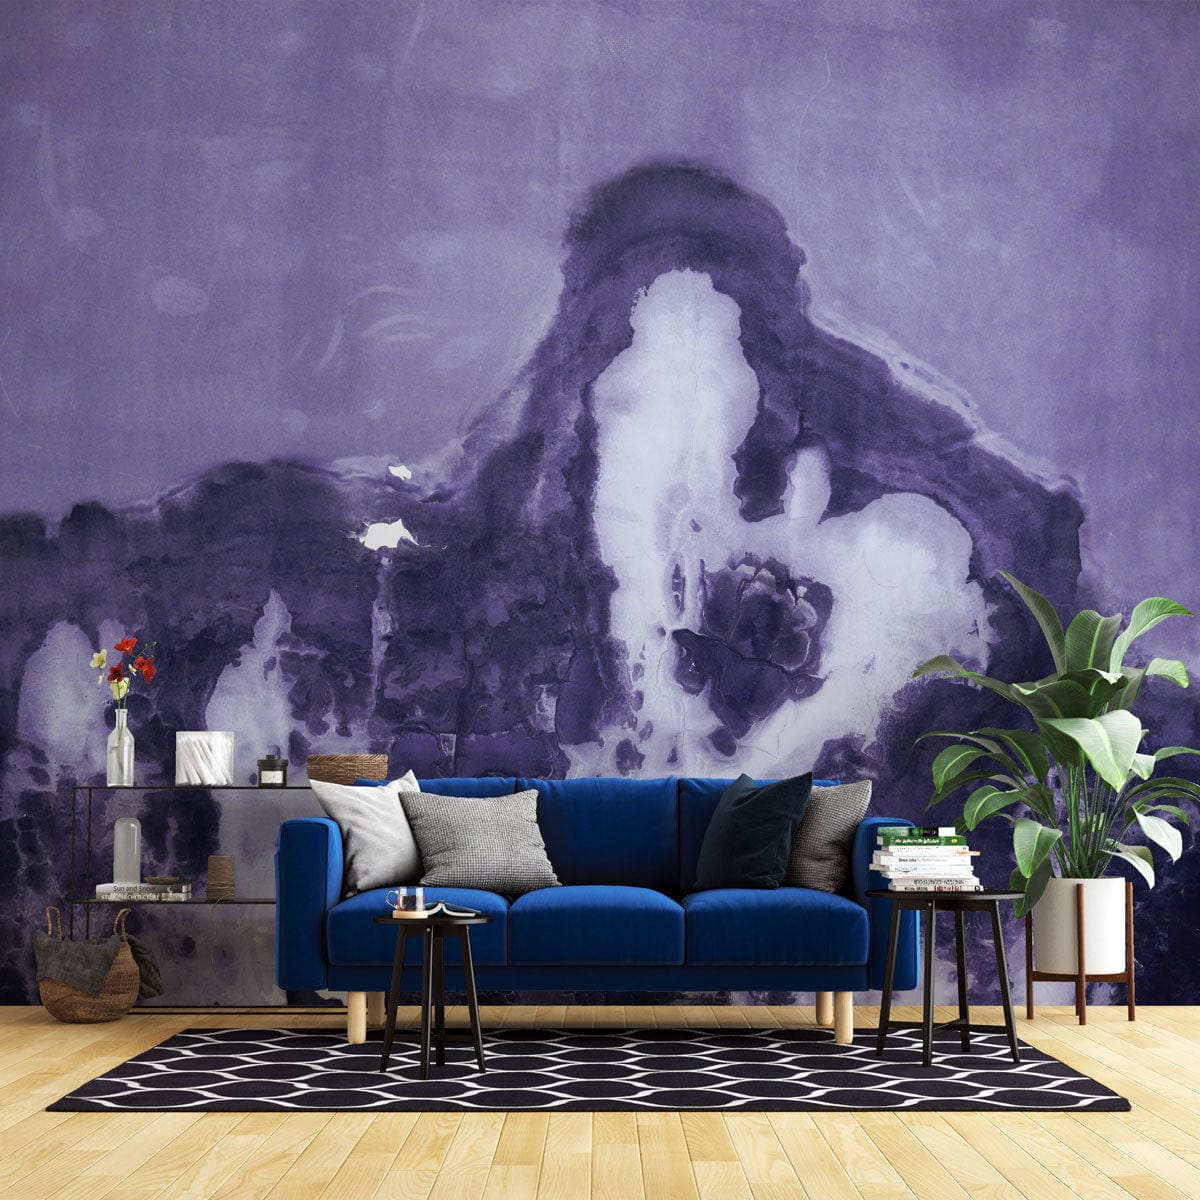 Wallpaper Mural for Living Room Decoration Featuring a Melting Purple and White Marble Pattern